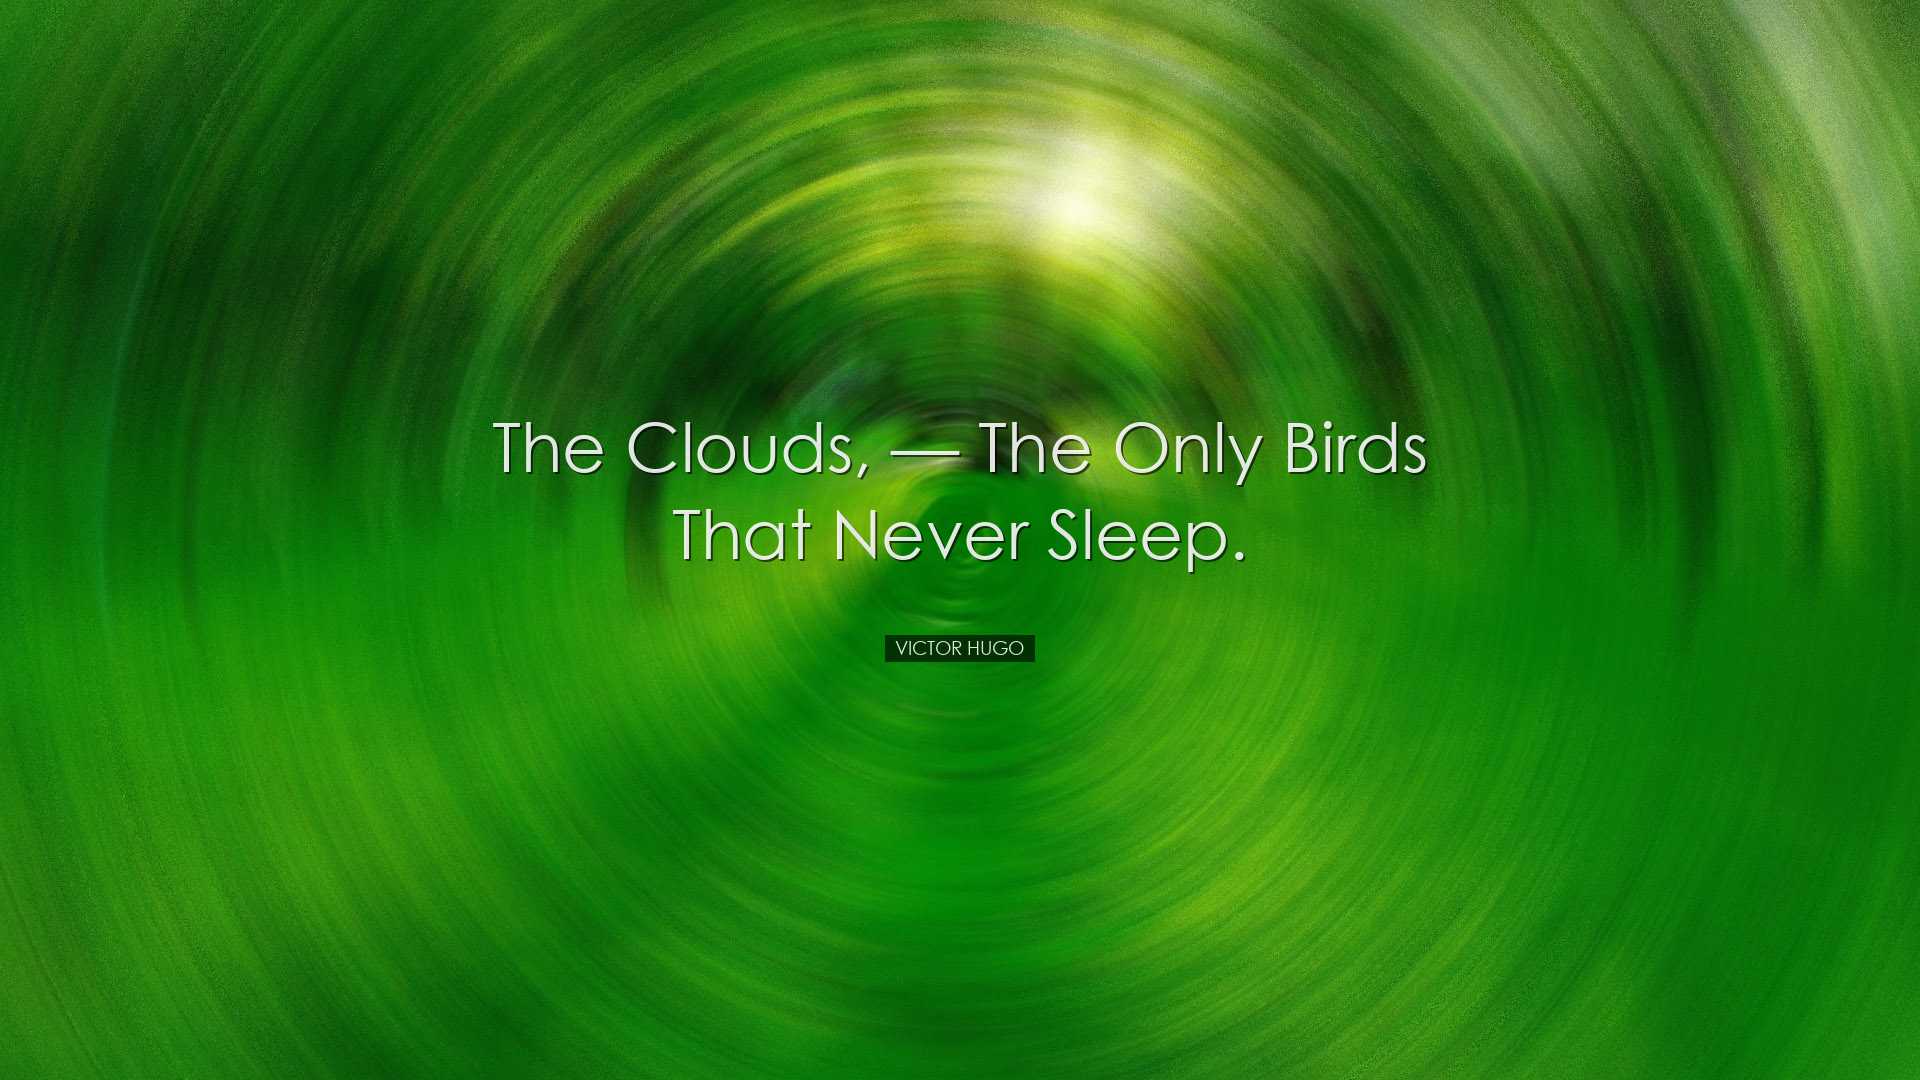 The clouds, — the only birds that never sleep. - Victor Hugo